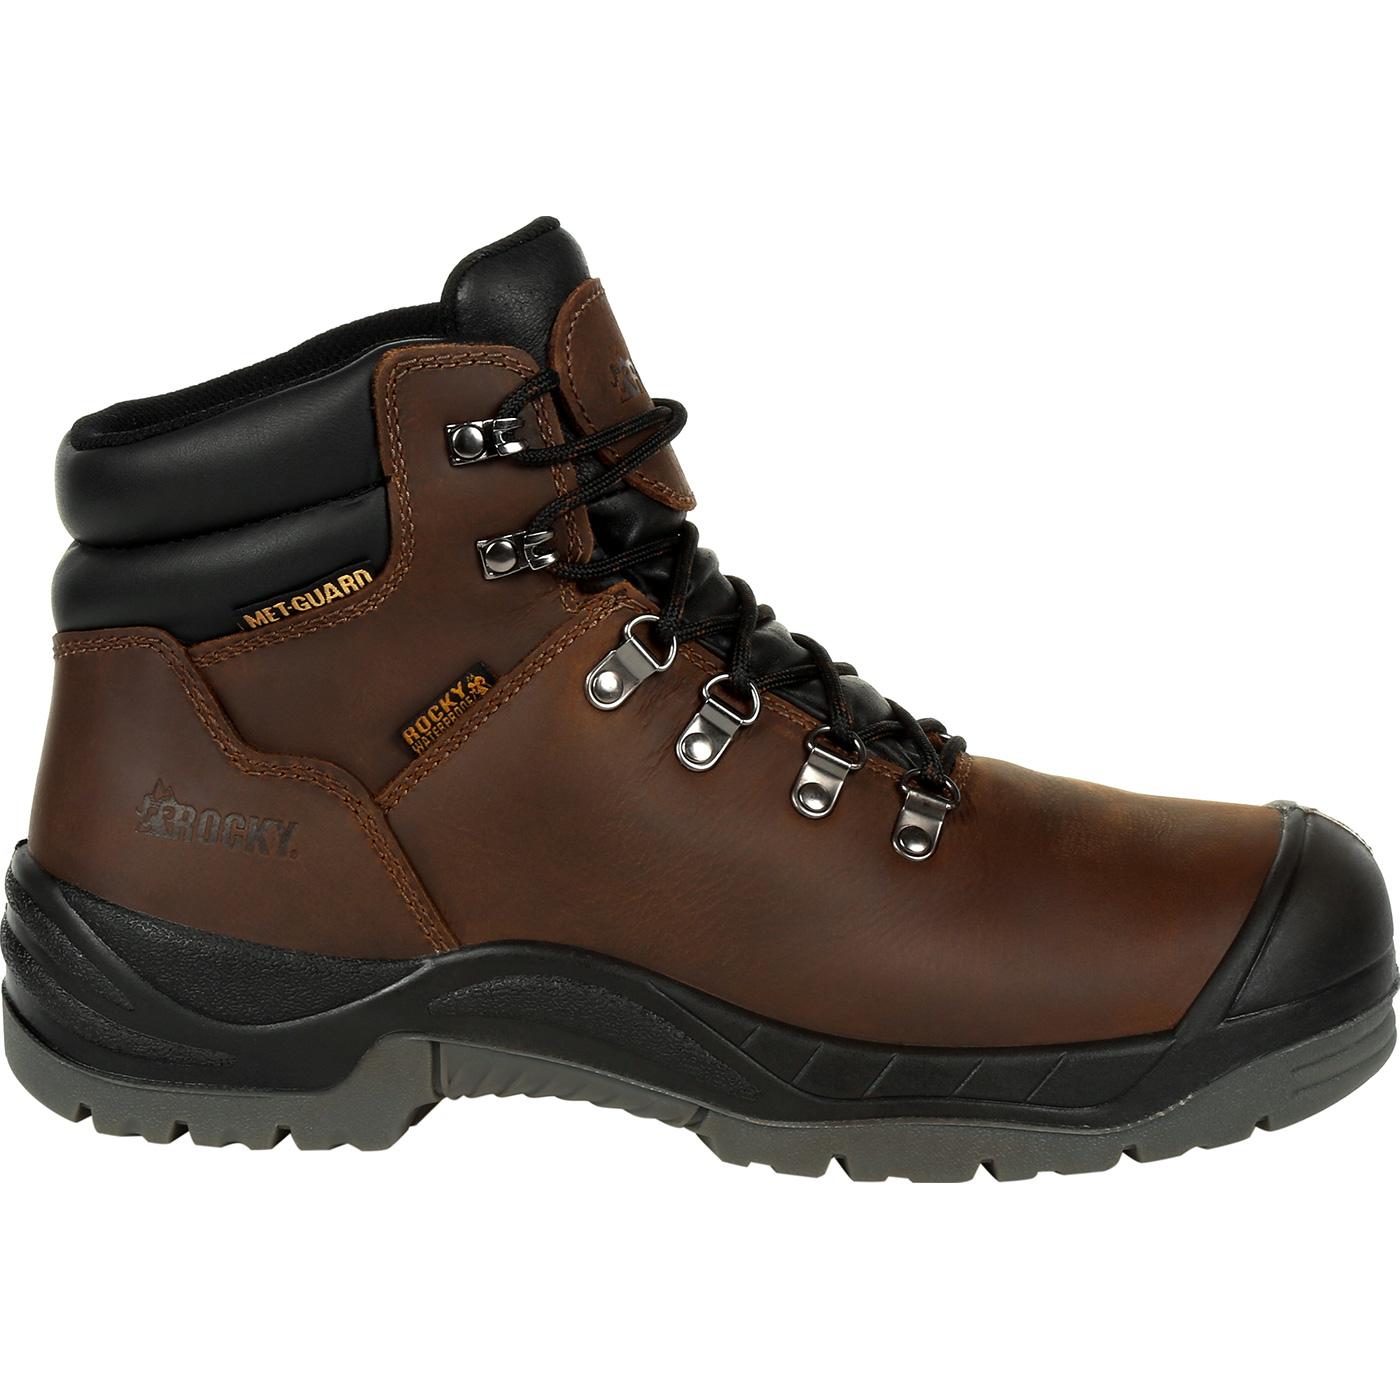 met guard safety boots